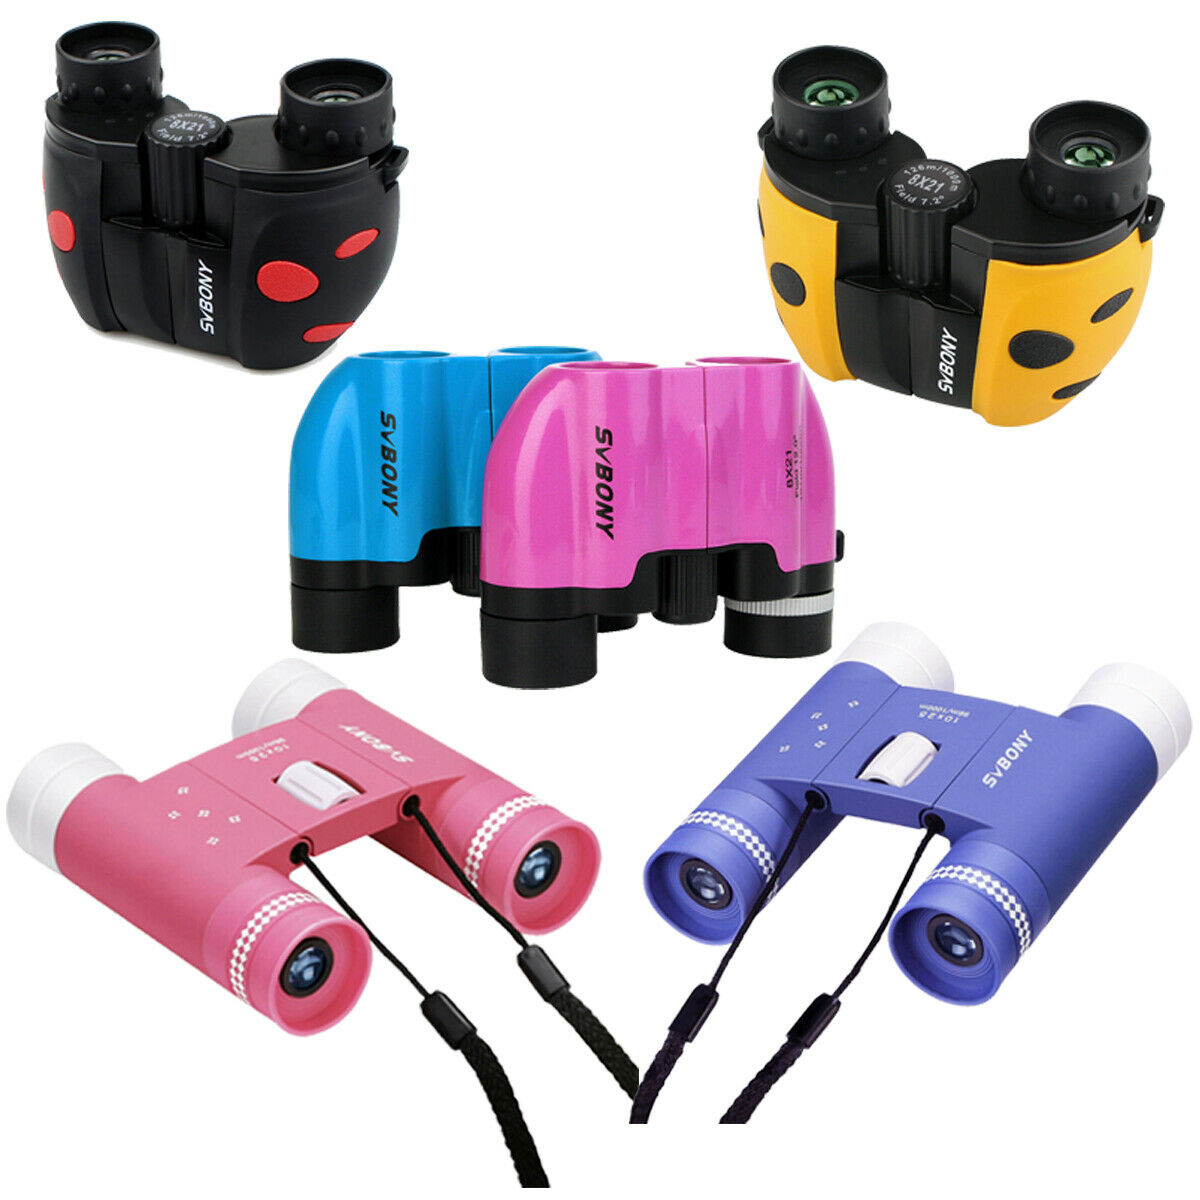 Kid's Binoculars 10x25/8x21 Svbony Compact Abs Festival Gift For Insect